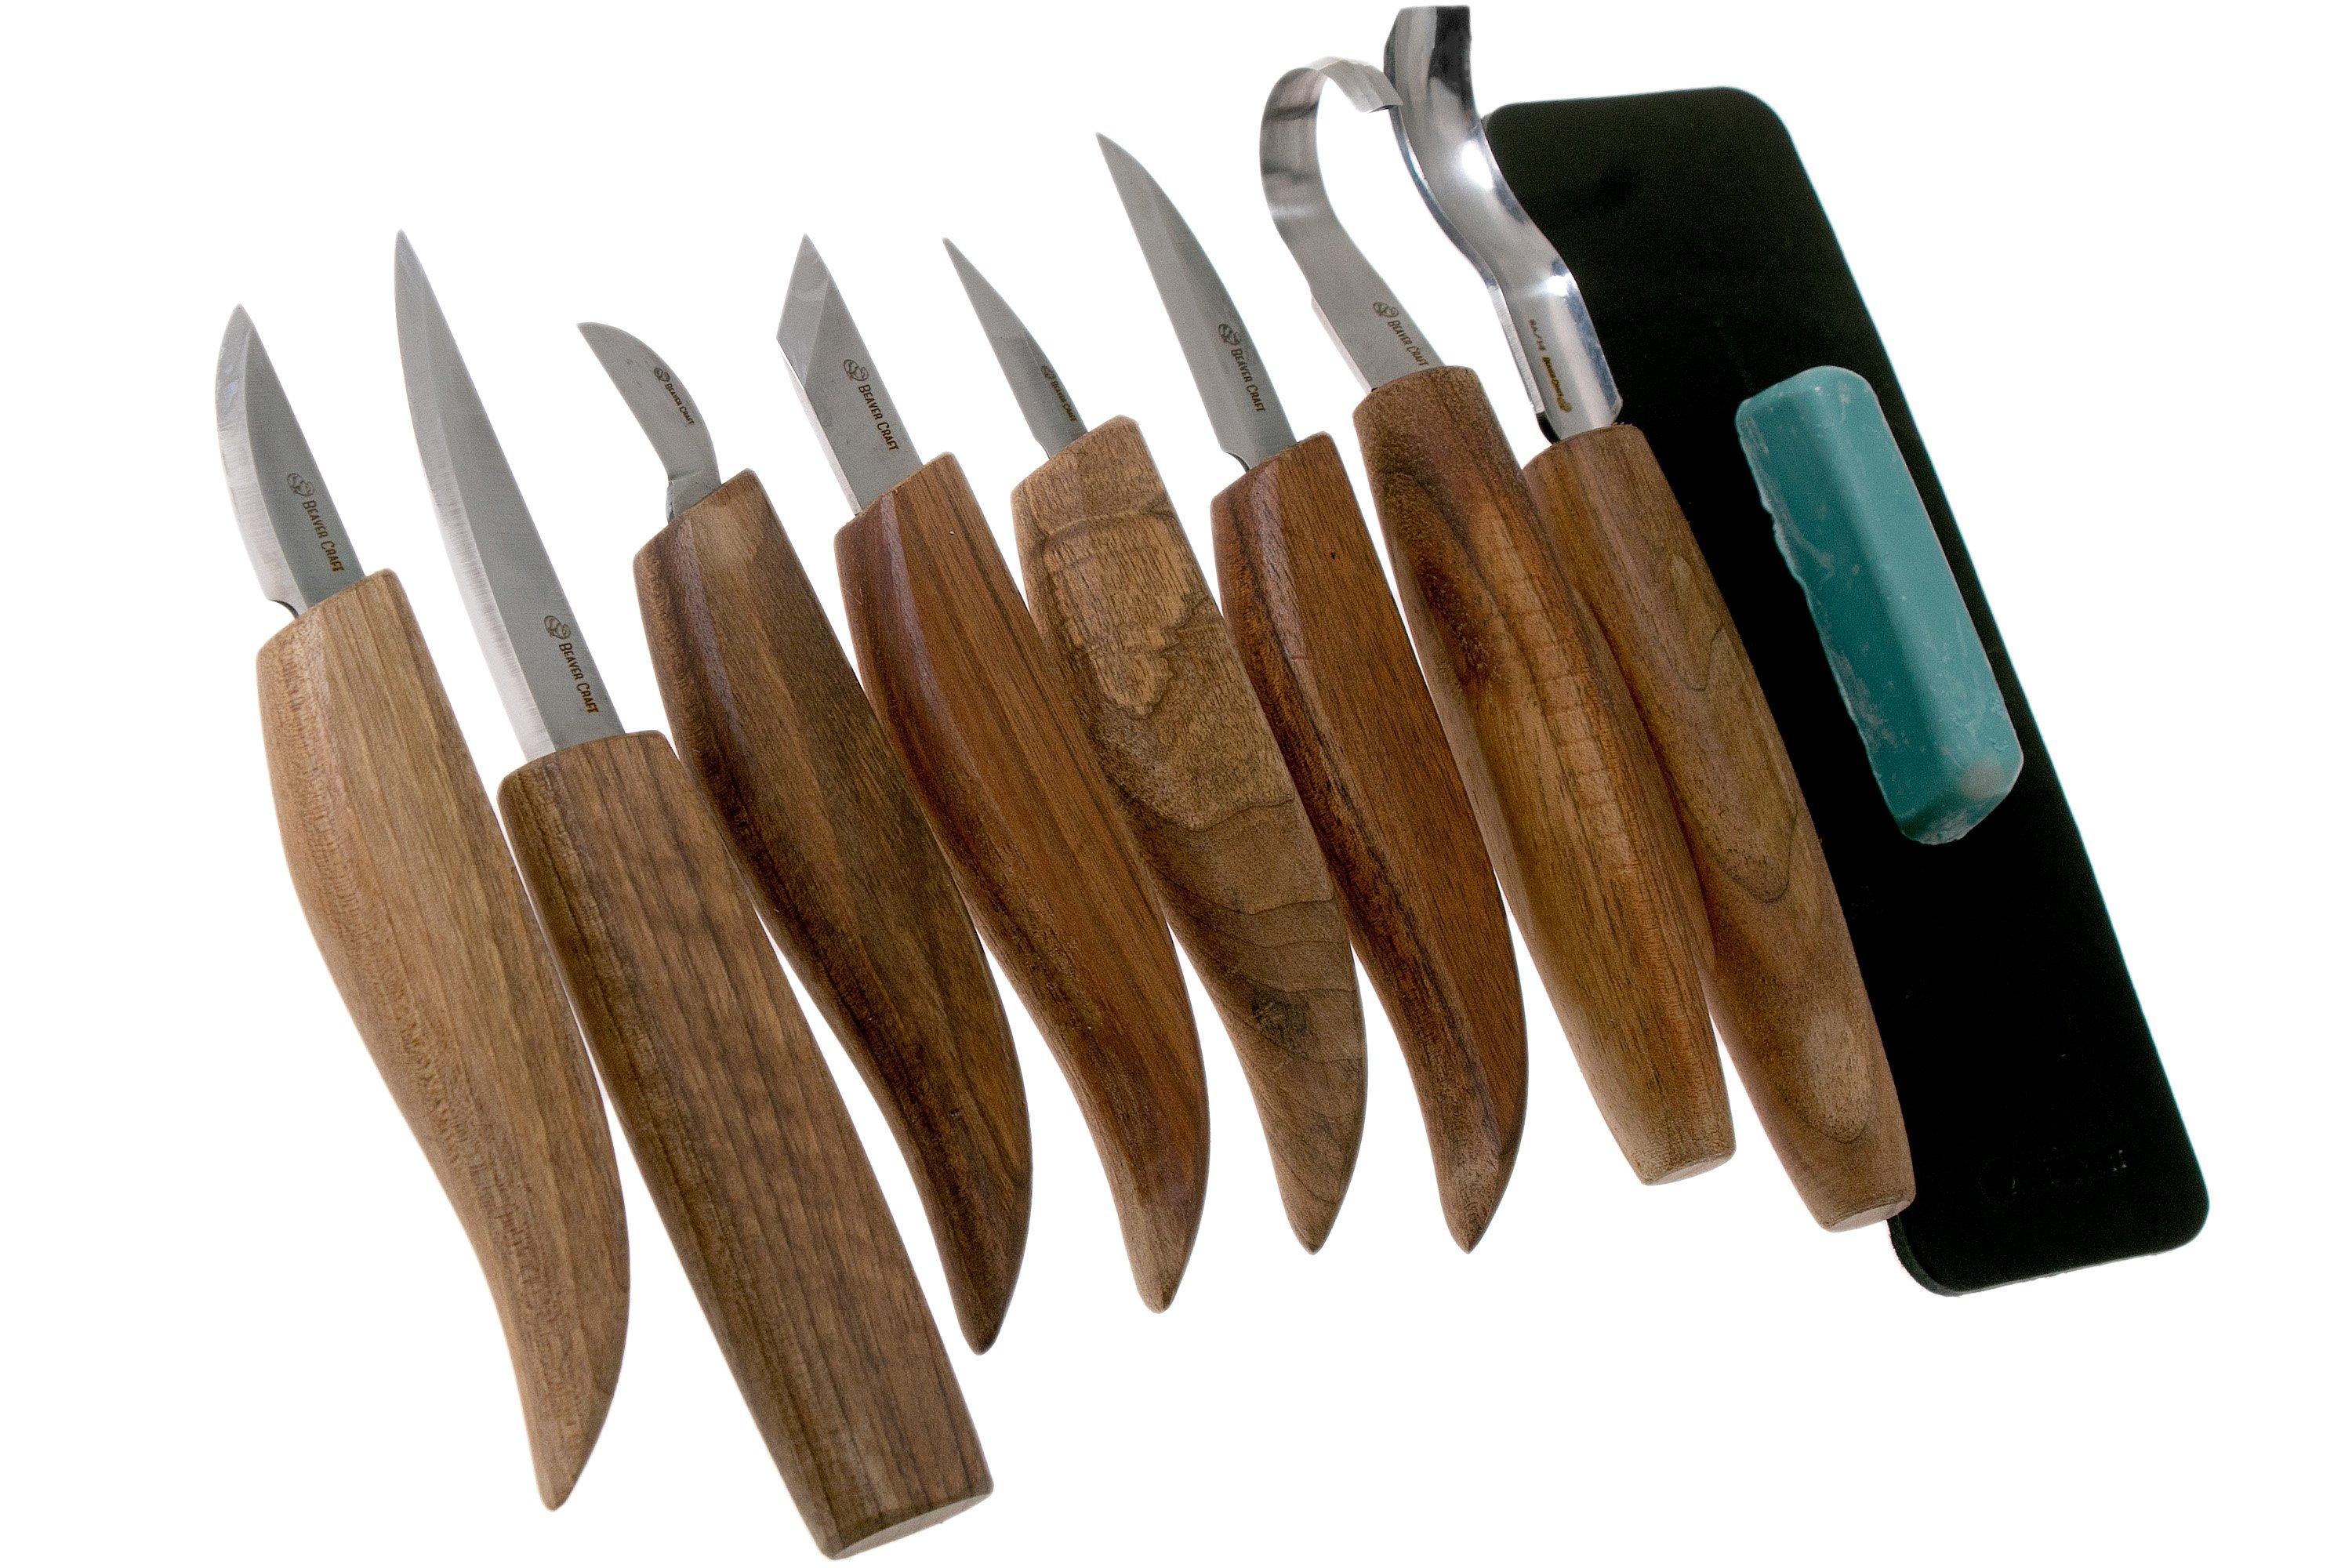 BeaverCraft Deluxe Wood Carving Kit S50X - Wood Carving Tools Wood